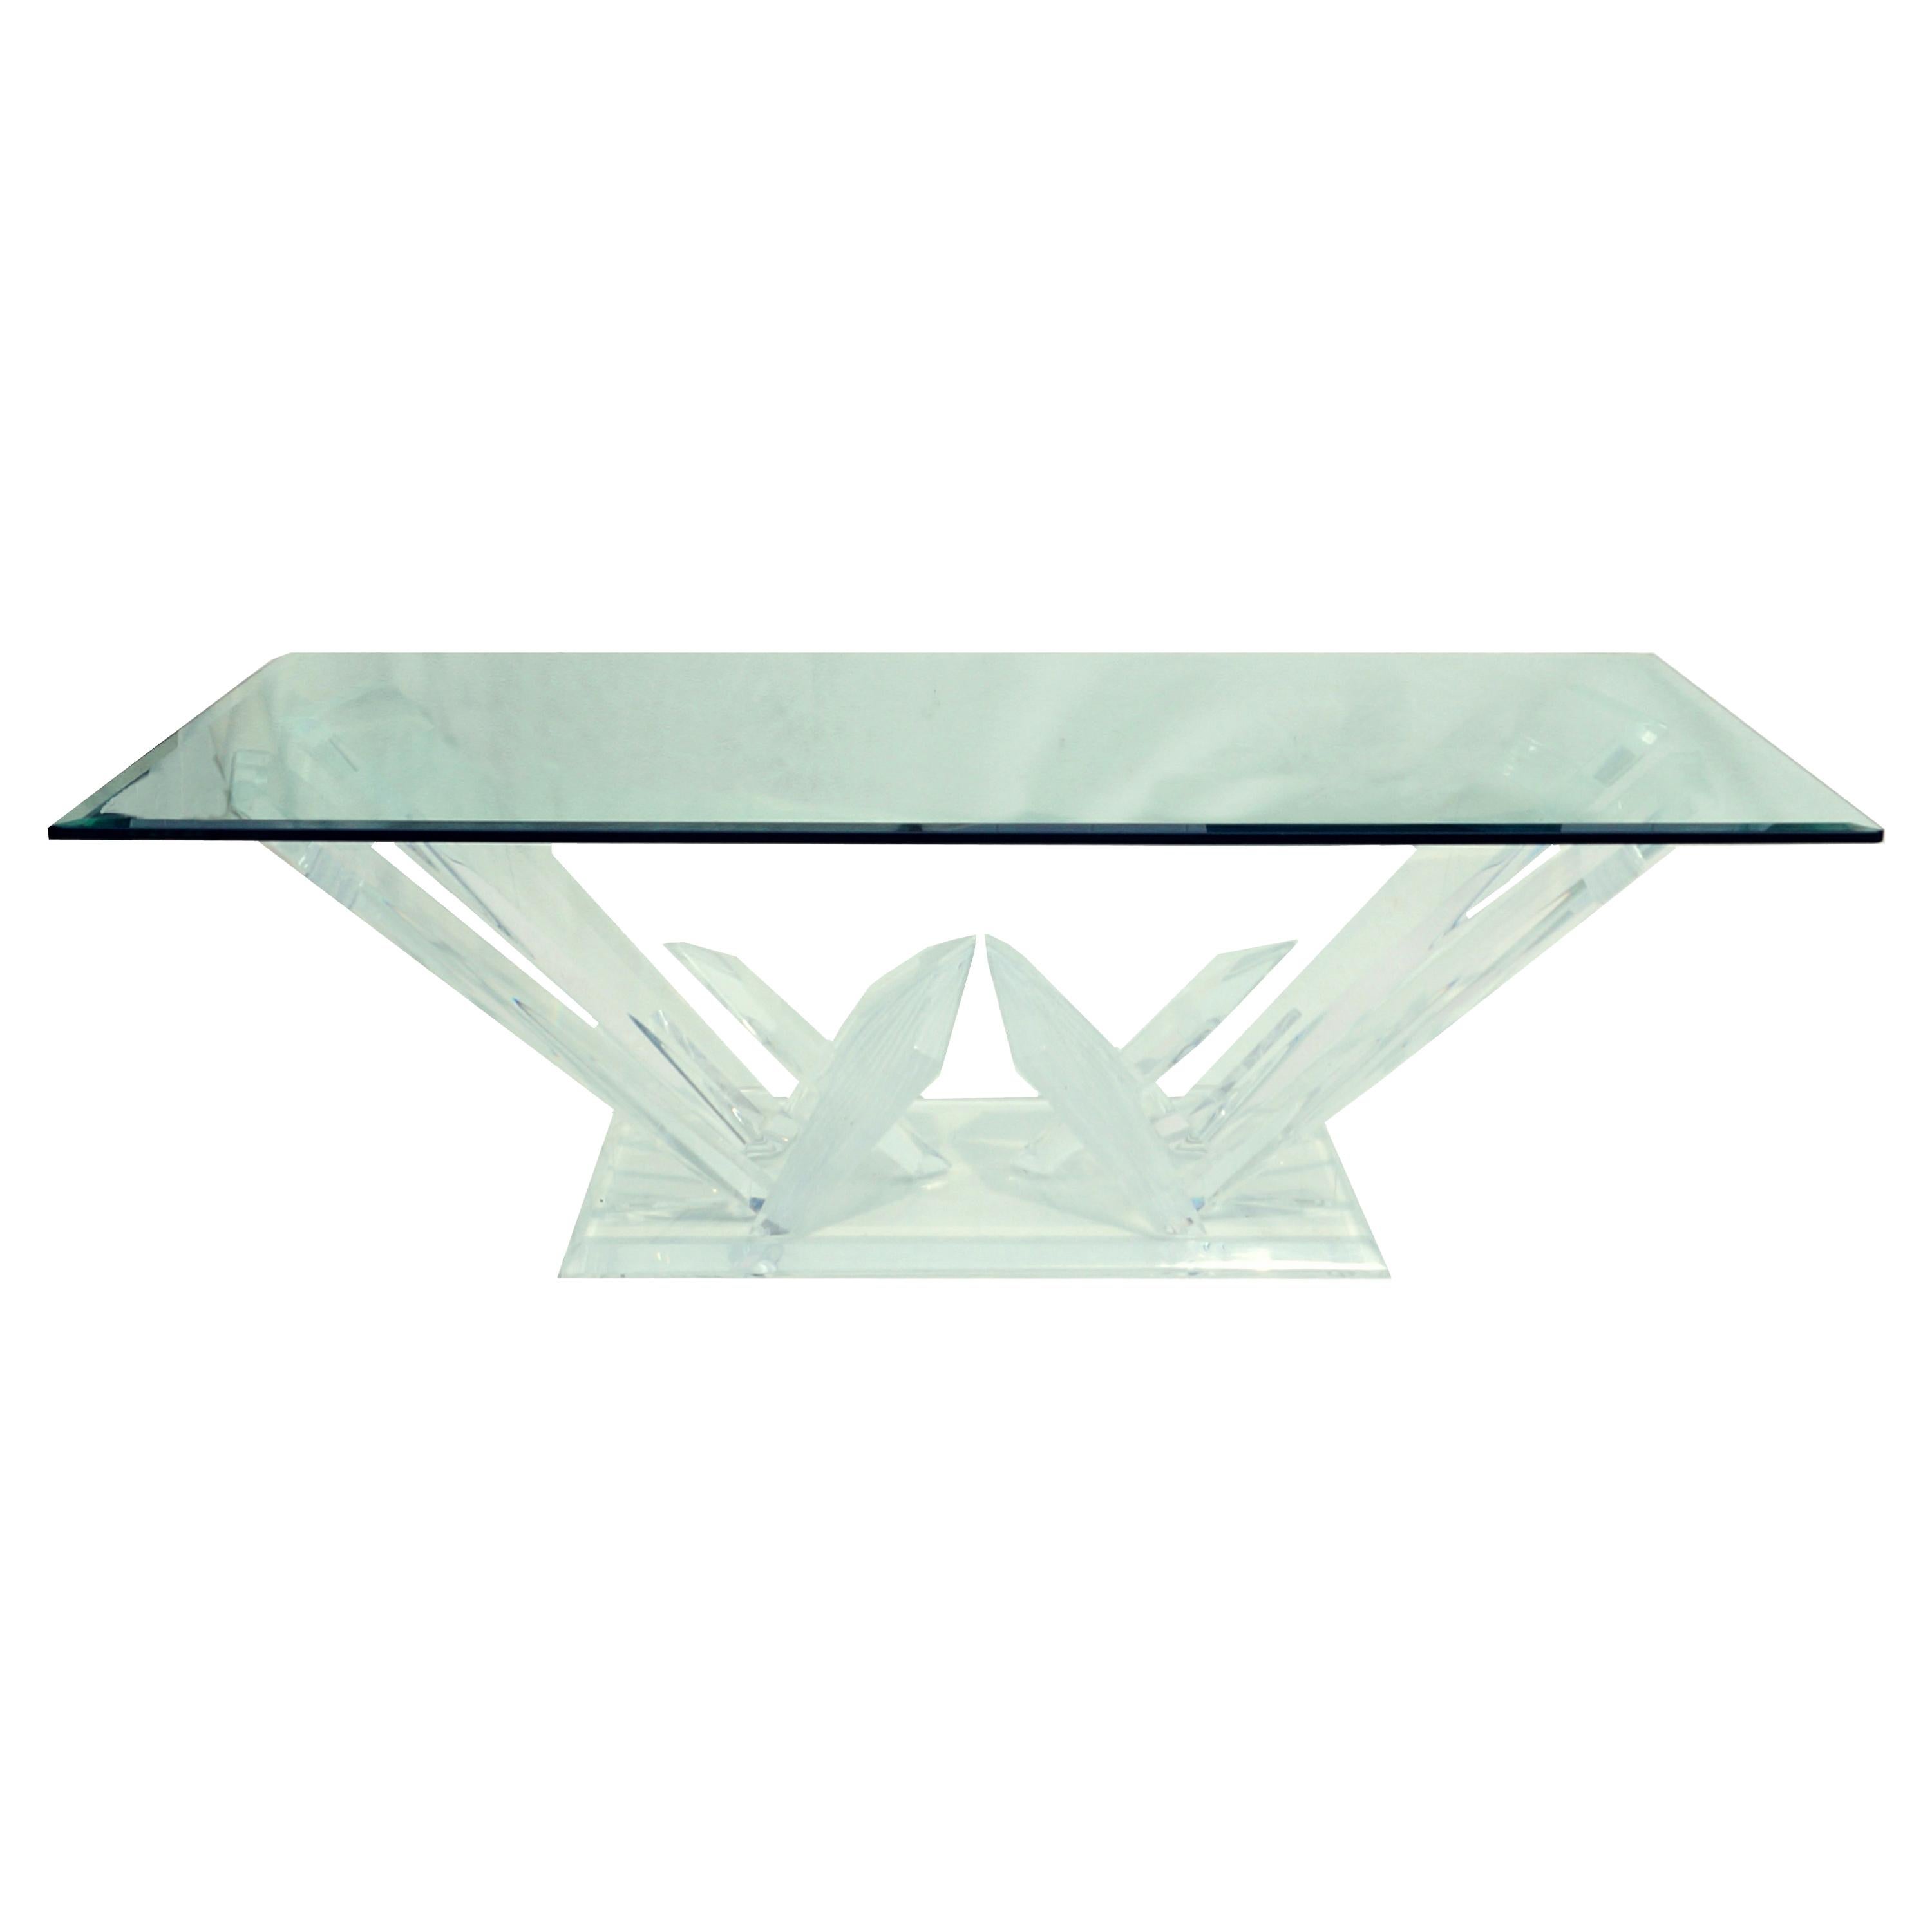 Lucite Glacier Iceberg Sculptural Coffee Cocktail Table Glass Top